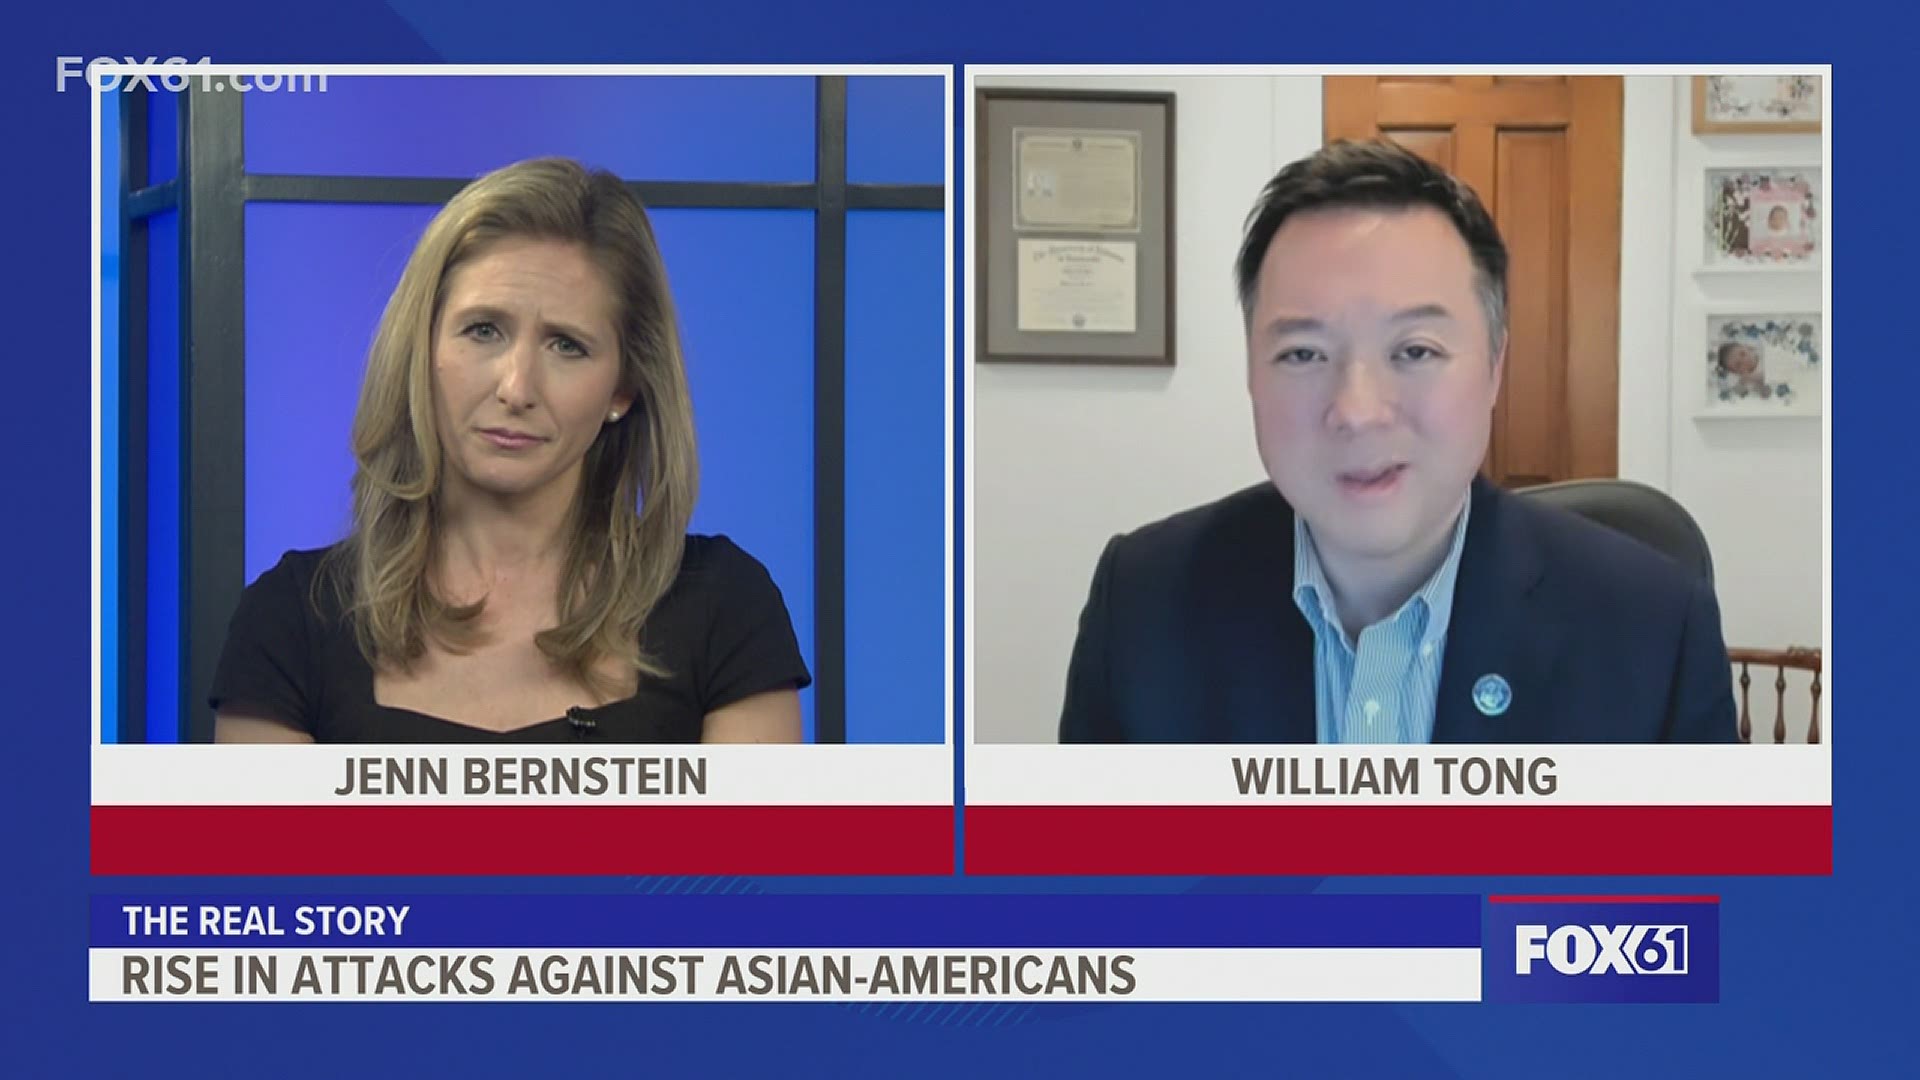 In the wake of a rise in attacks against Asian-Americans, Attorney General William Tong speaks out about concerns over the attacks.